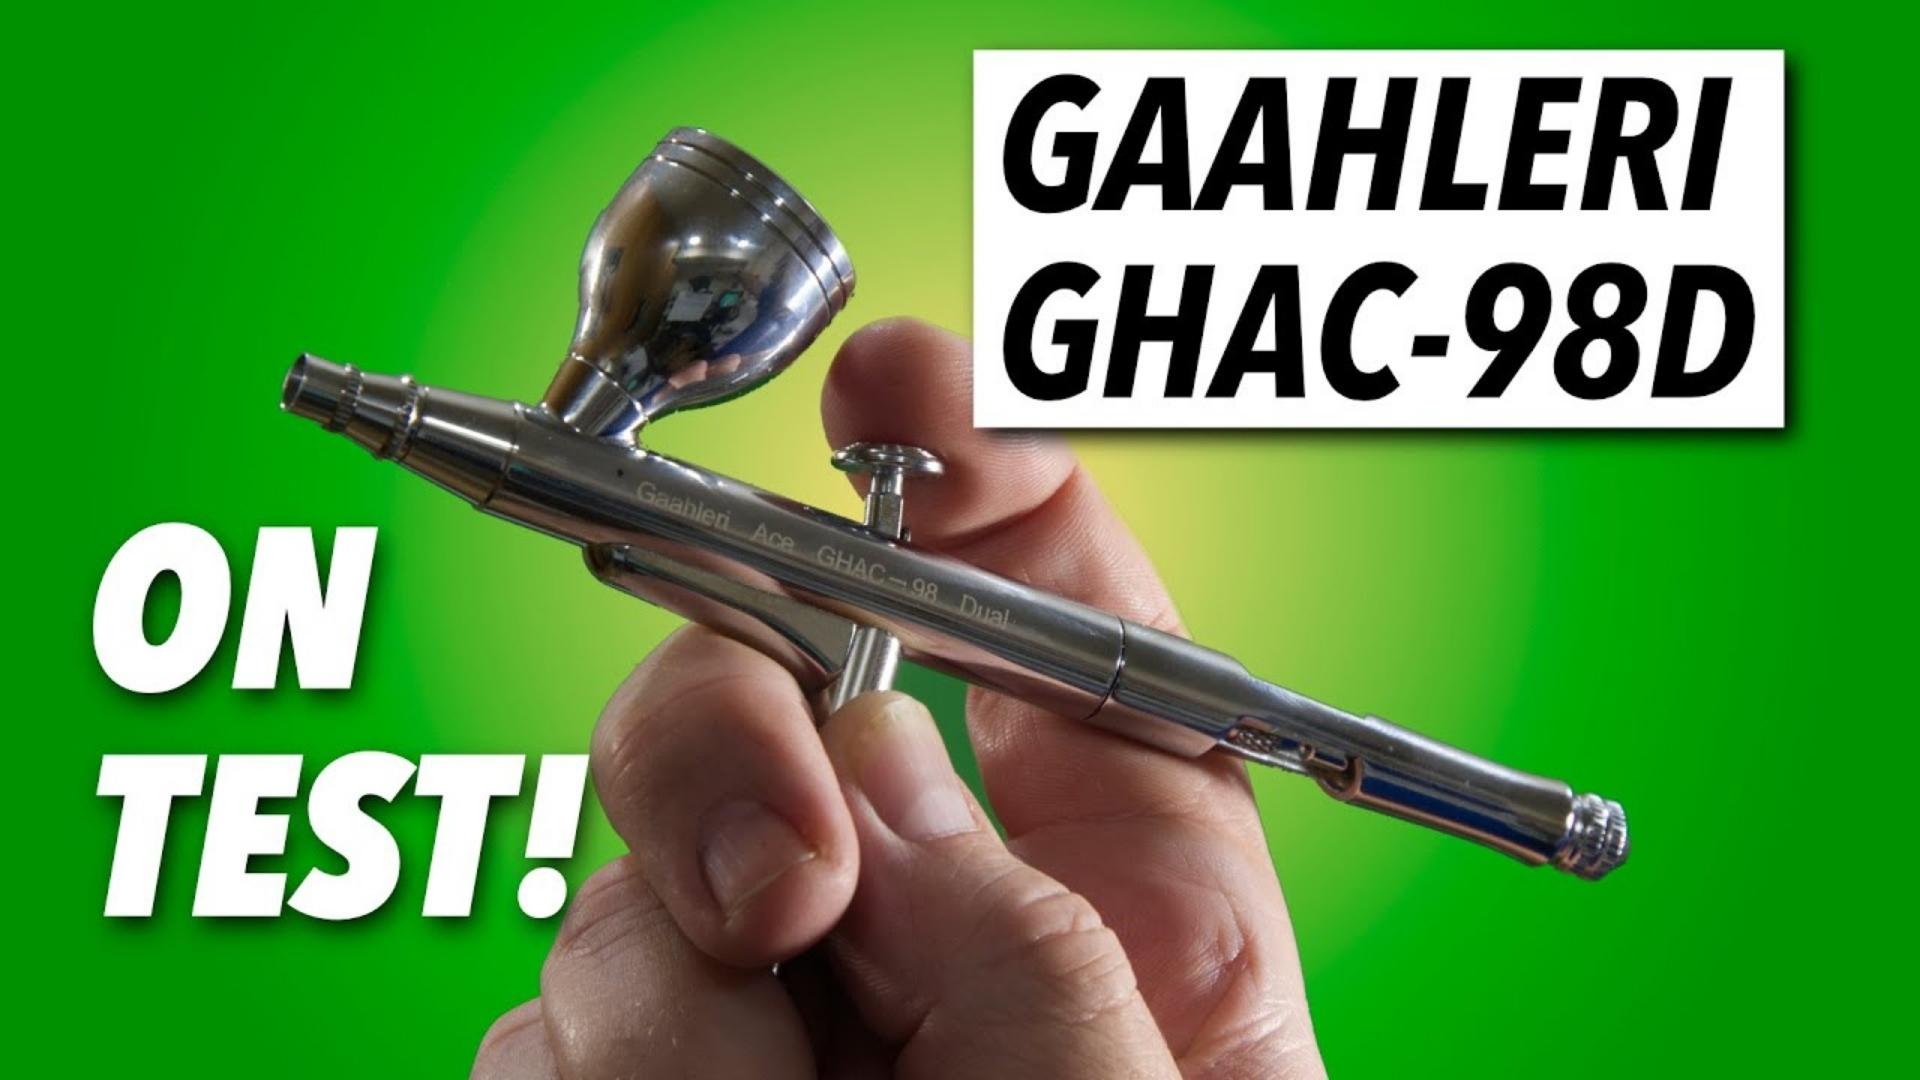 GAAHLERI GHAC-98D & GHAD-68 Airbrush On Test Painting Review Part